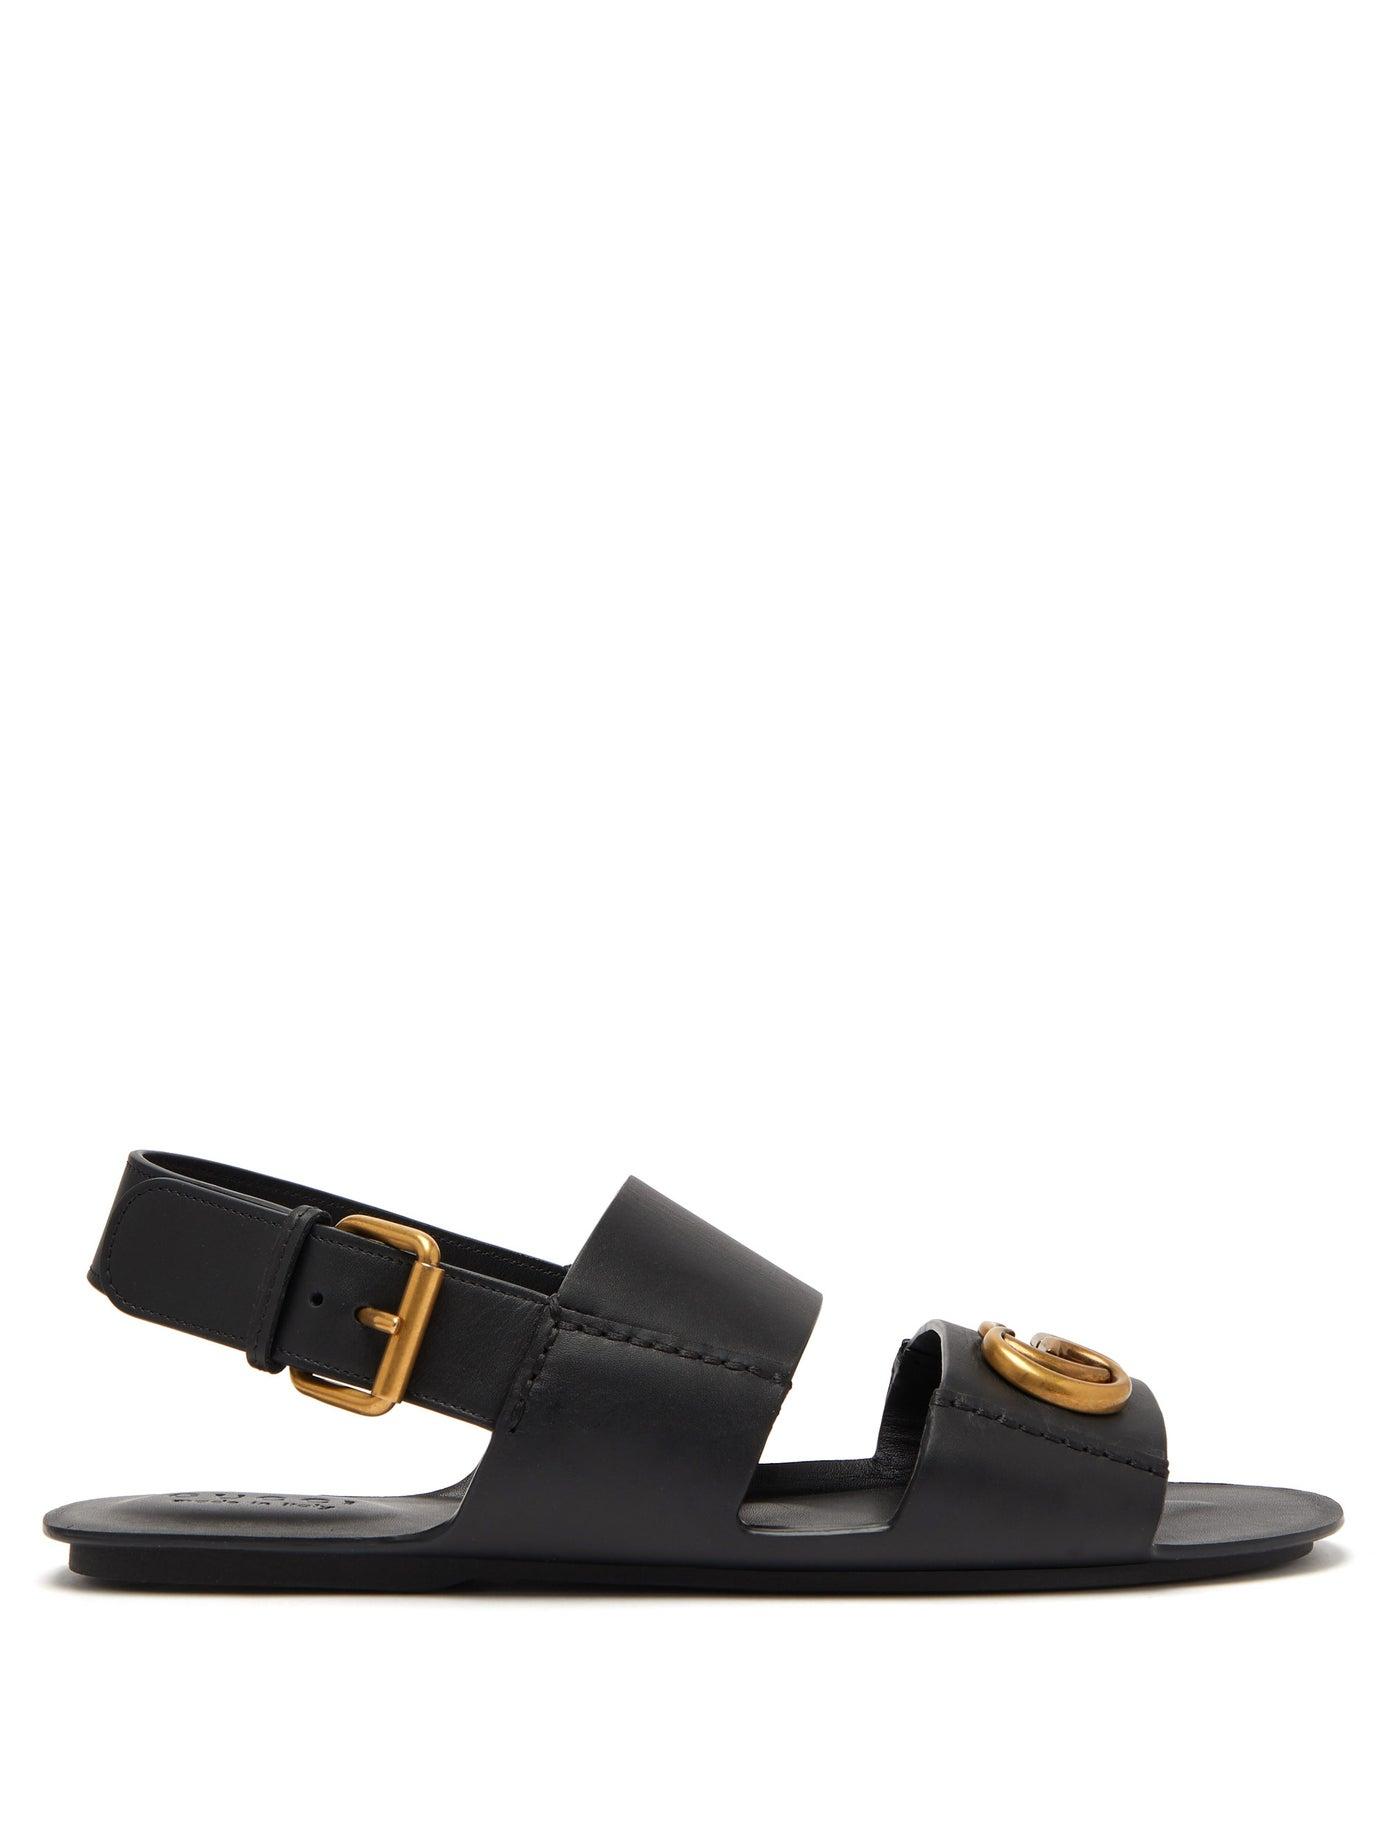 Gucci Gg Marmont Leather Sandals in Black for Men - Lyst